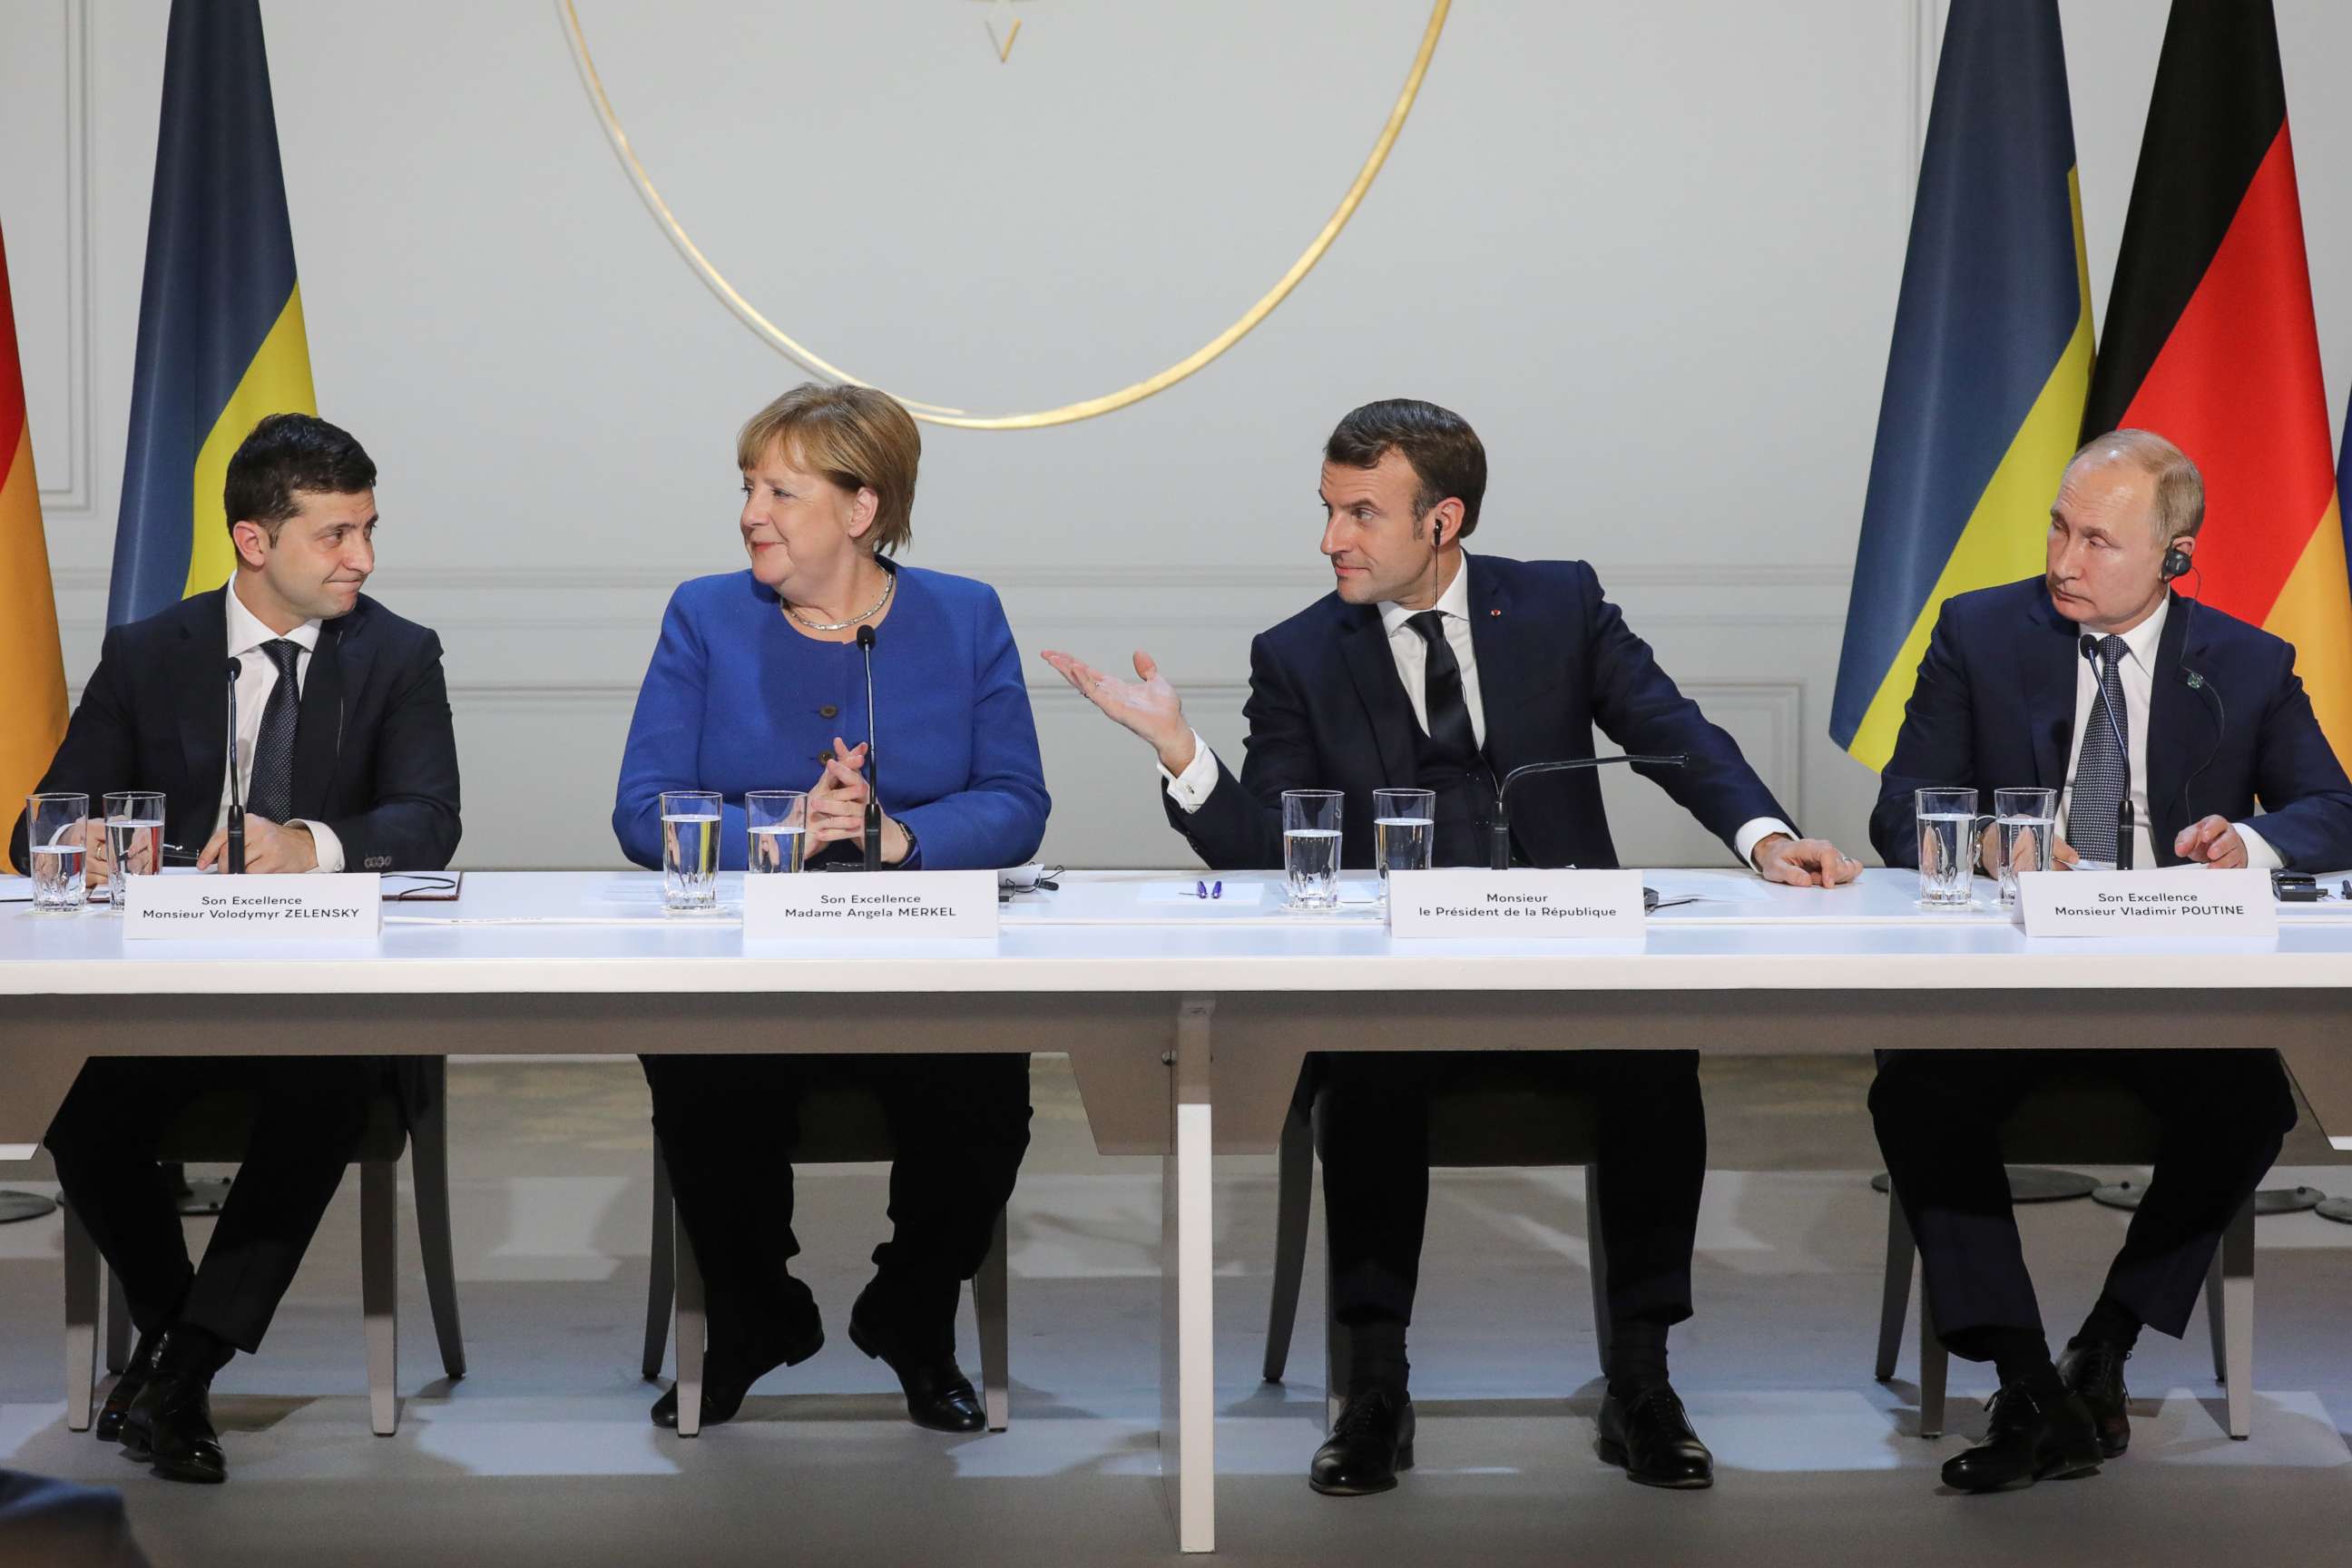 PHOTO: Ukrainian President Volodymyr Zelenskyy, German Chancellor Angela Merkel, French President Emmanuel Macron and Russian President Vladimir Putin give a press conference after a summit on Ukraine at the Elysee Palace, in Paris, Dec. 9, 2019.